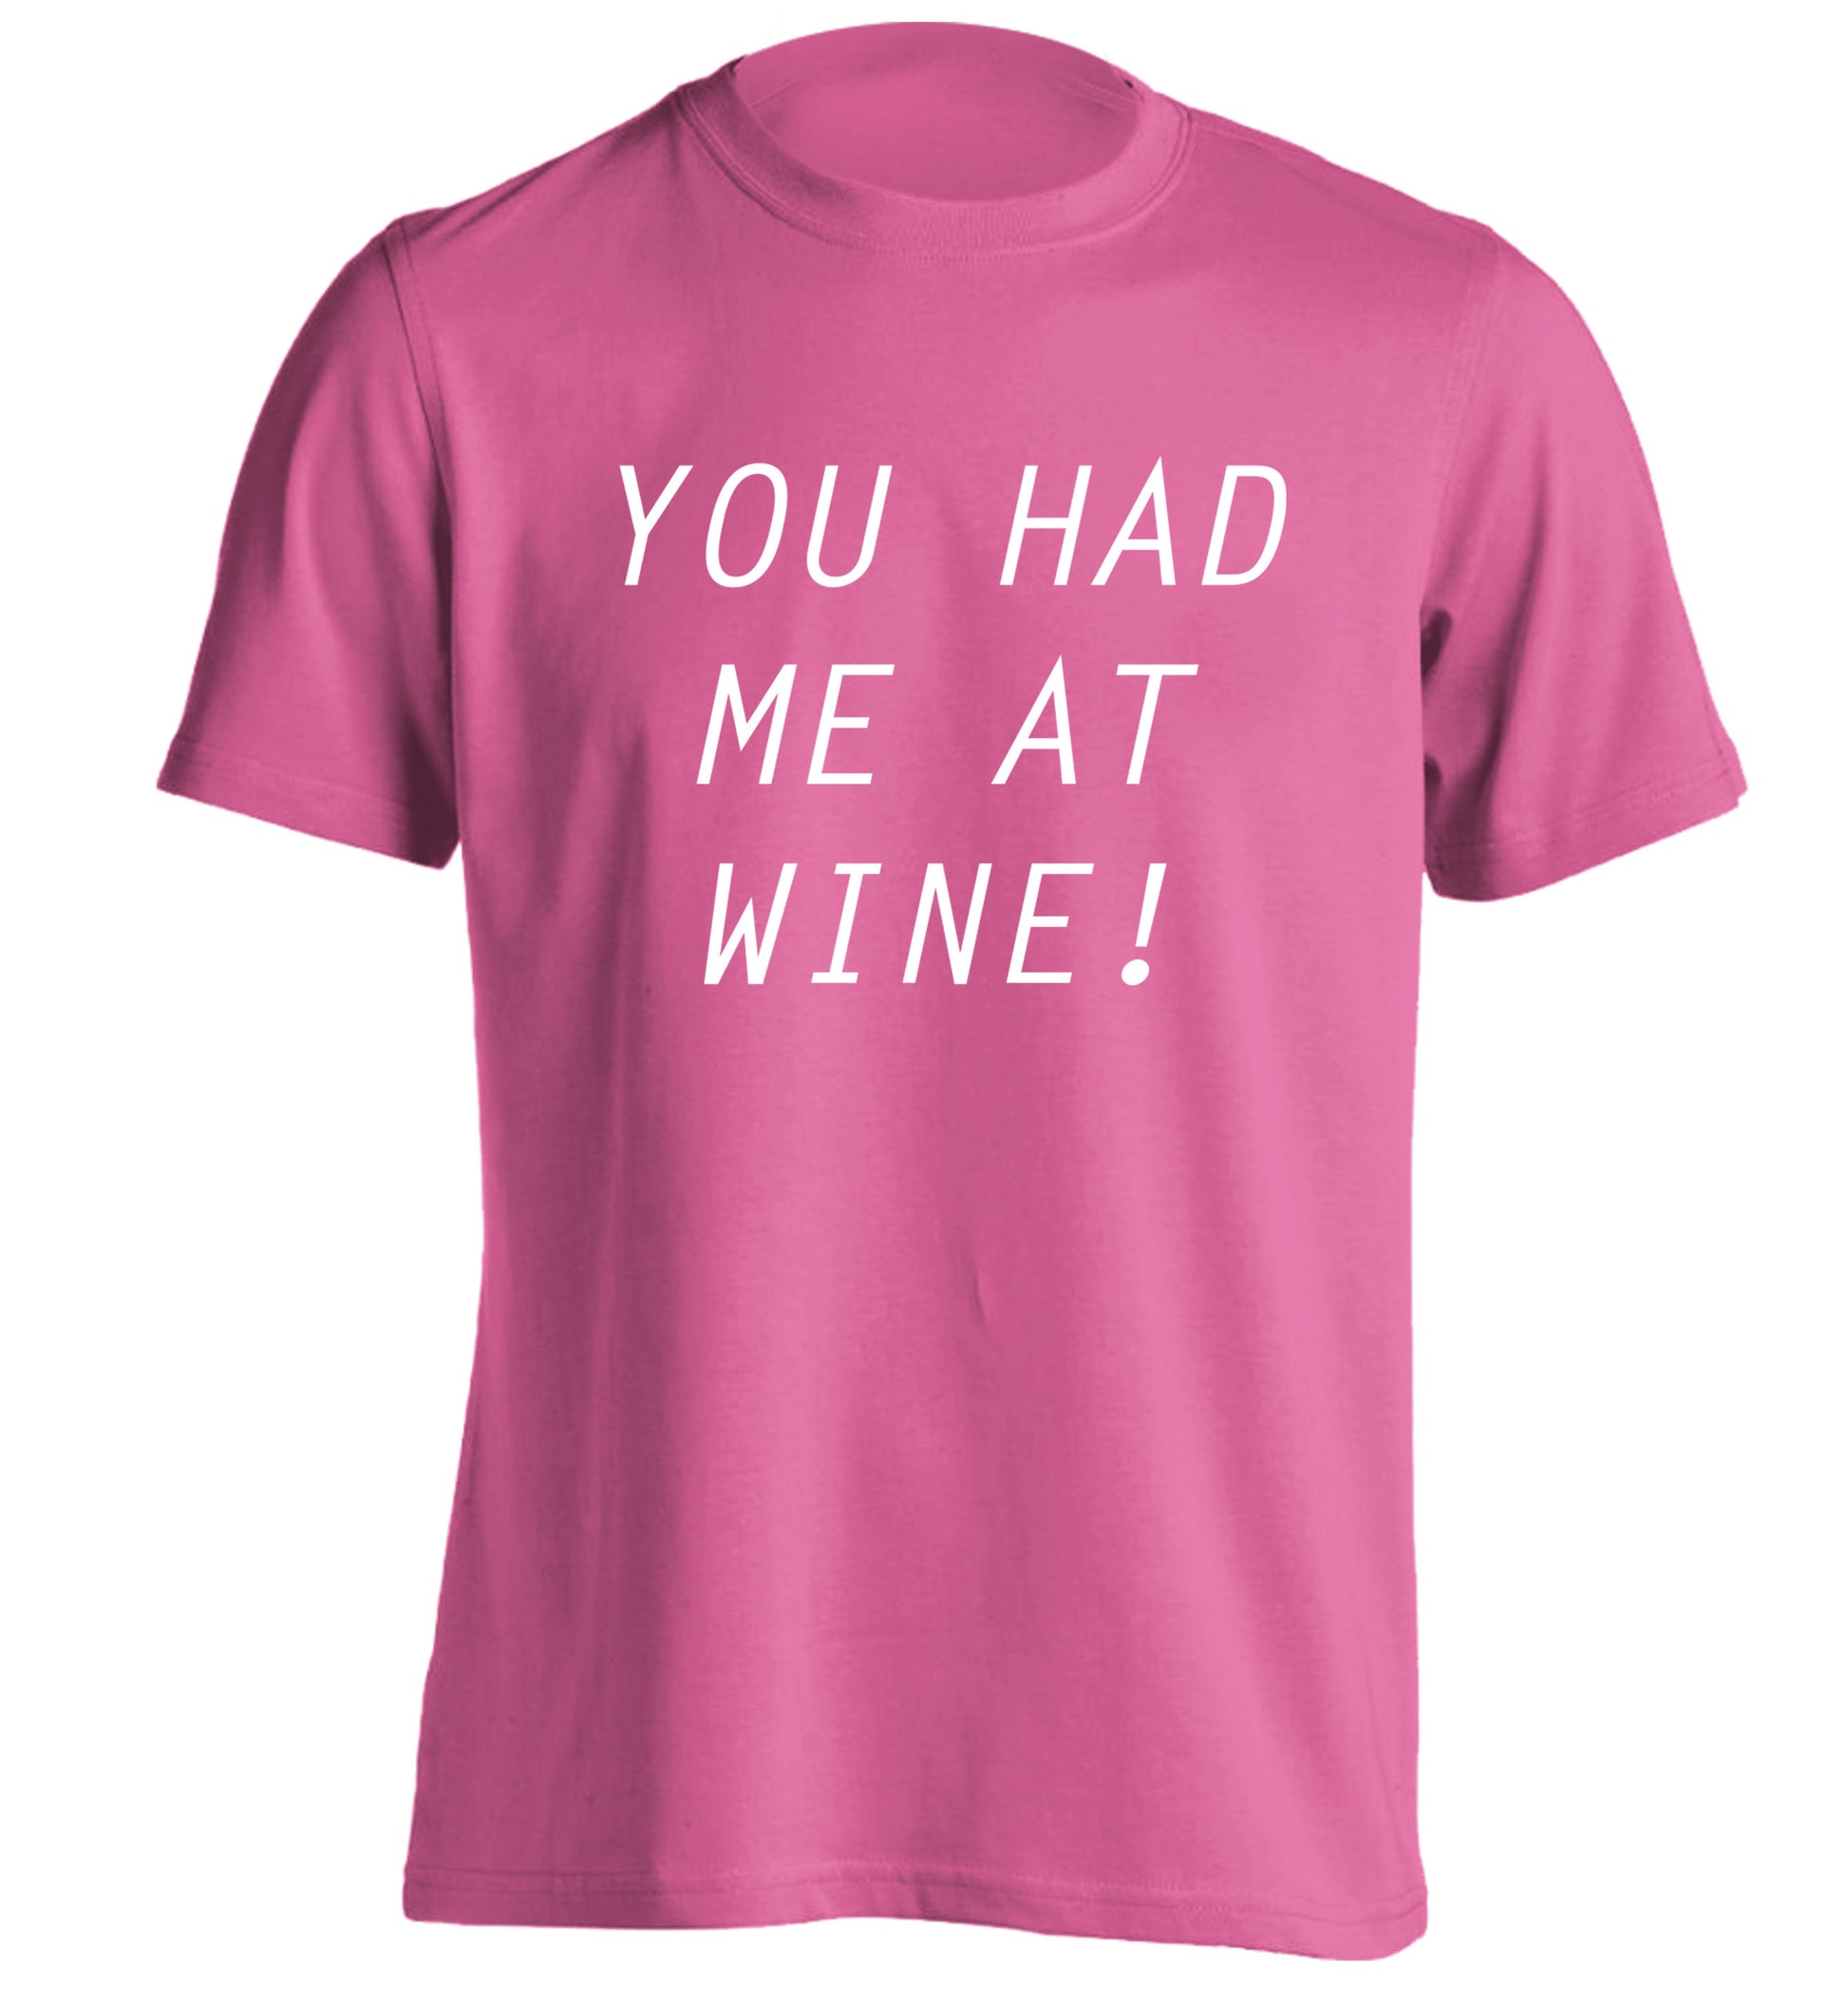 You had me at wine adults unisex pink Tshirt 2XL